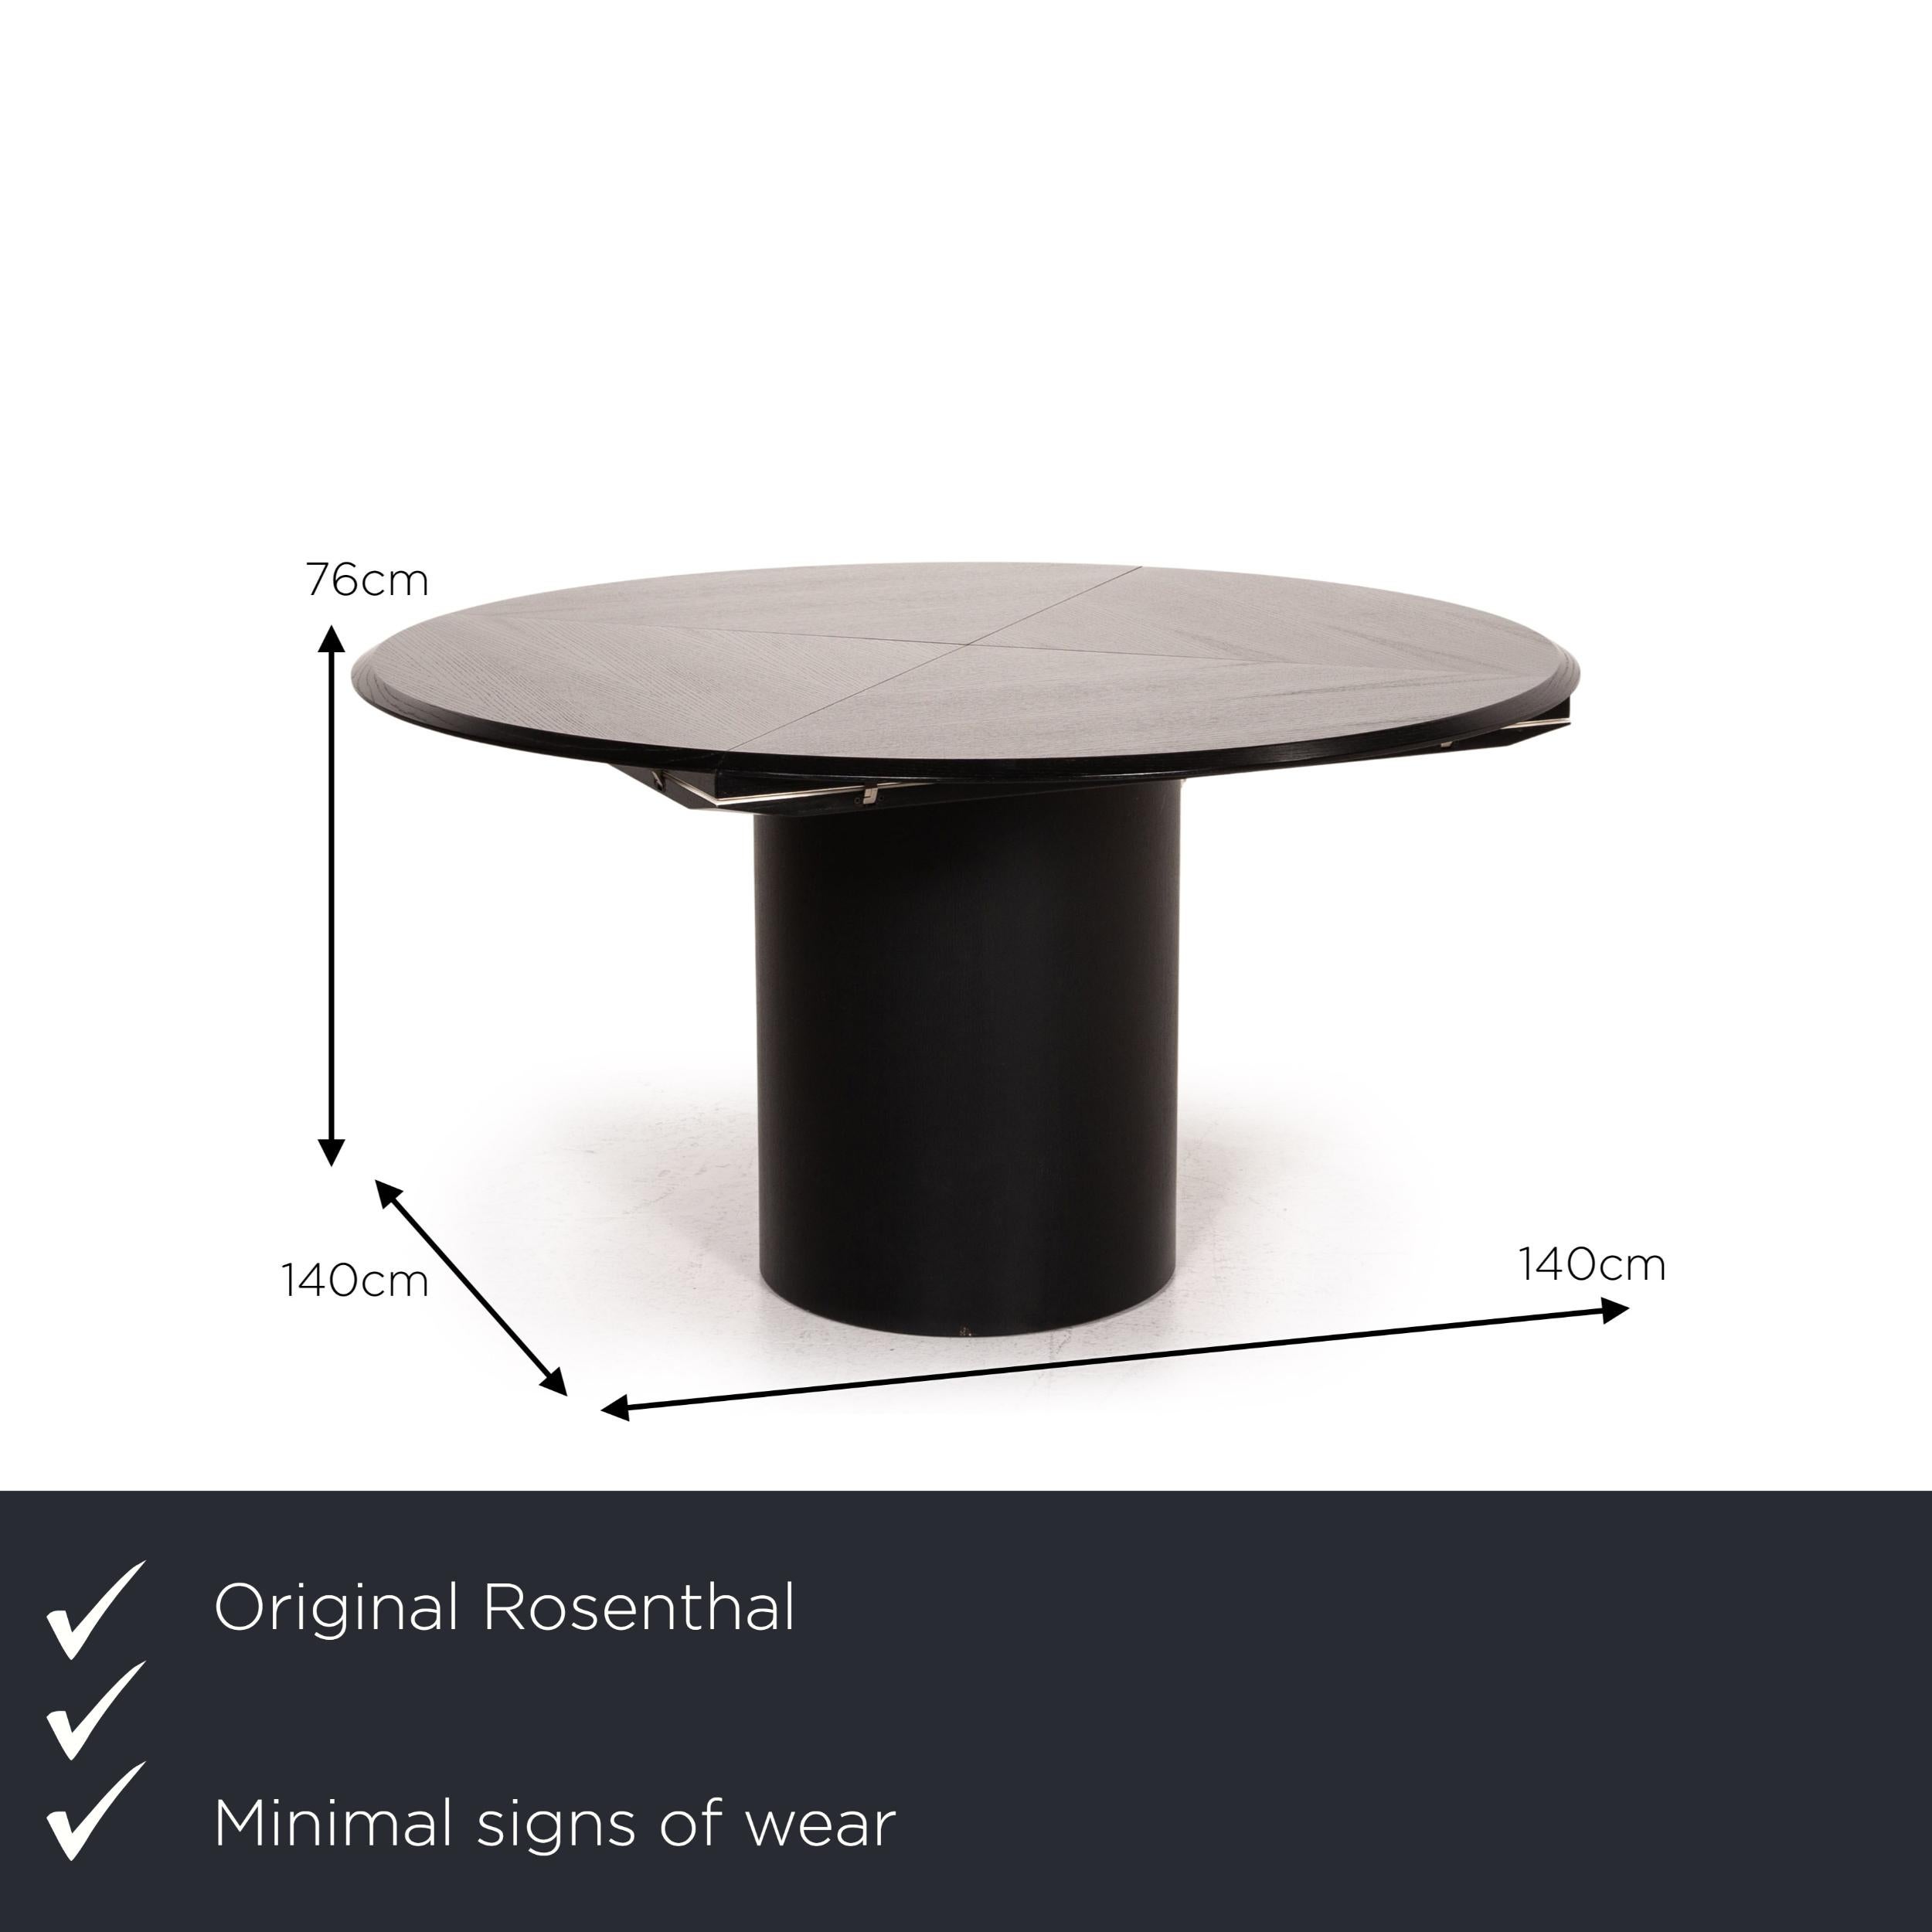 We present to you a Rosenthal Quadrondo dining table round black and white foldable function square.


 Product measurements in centimeters:
 

 Depth: 140
 Width: 140
Hheight: 76.





 